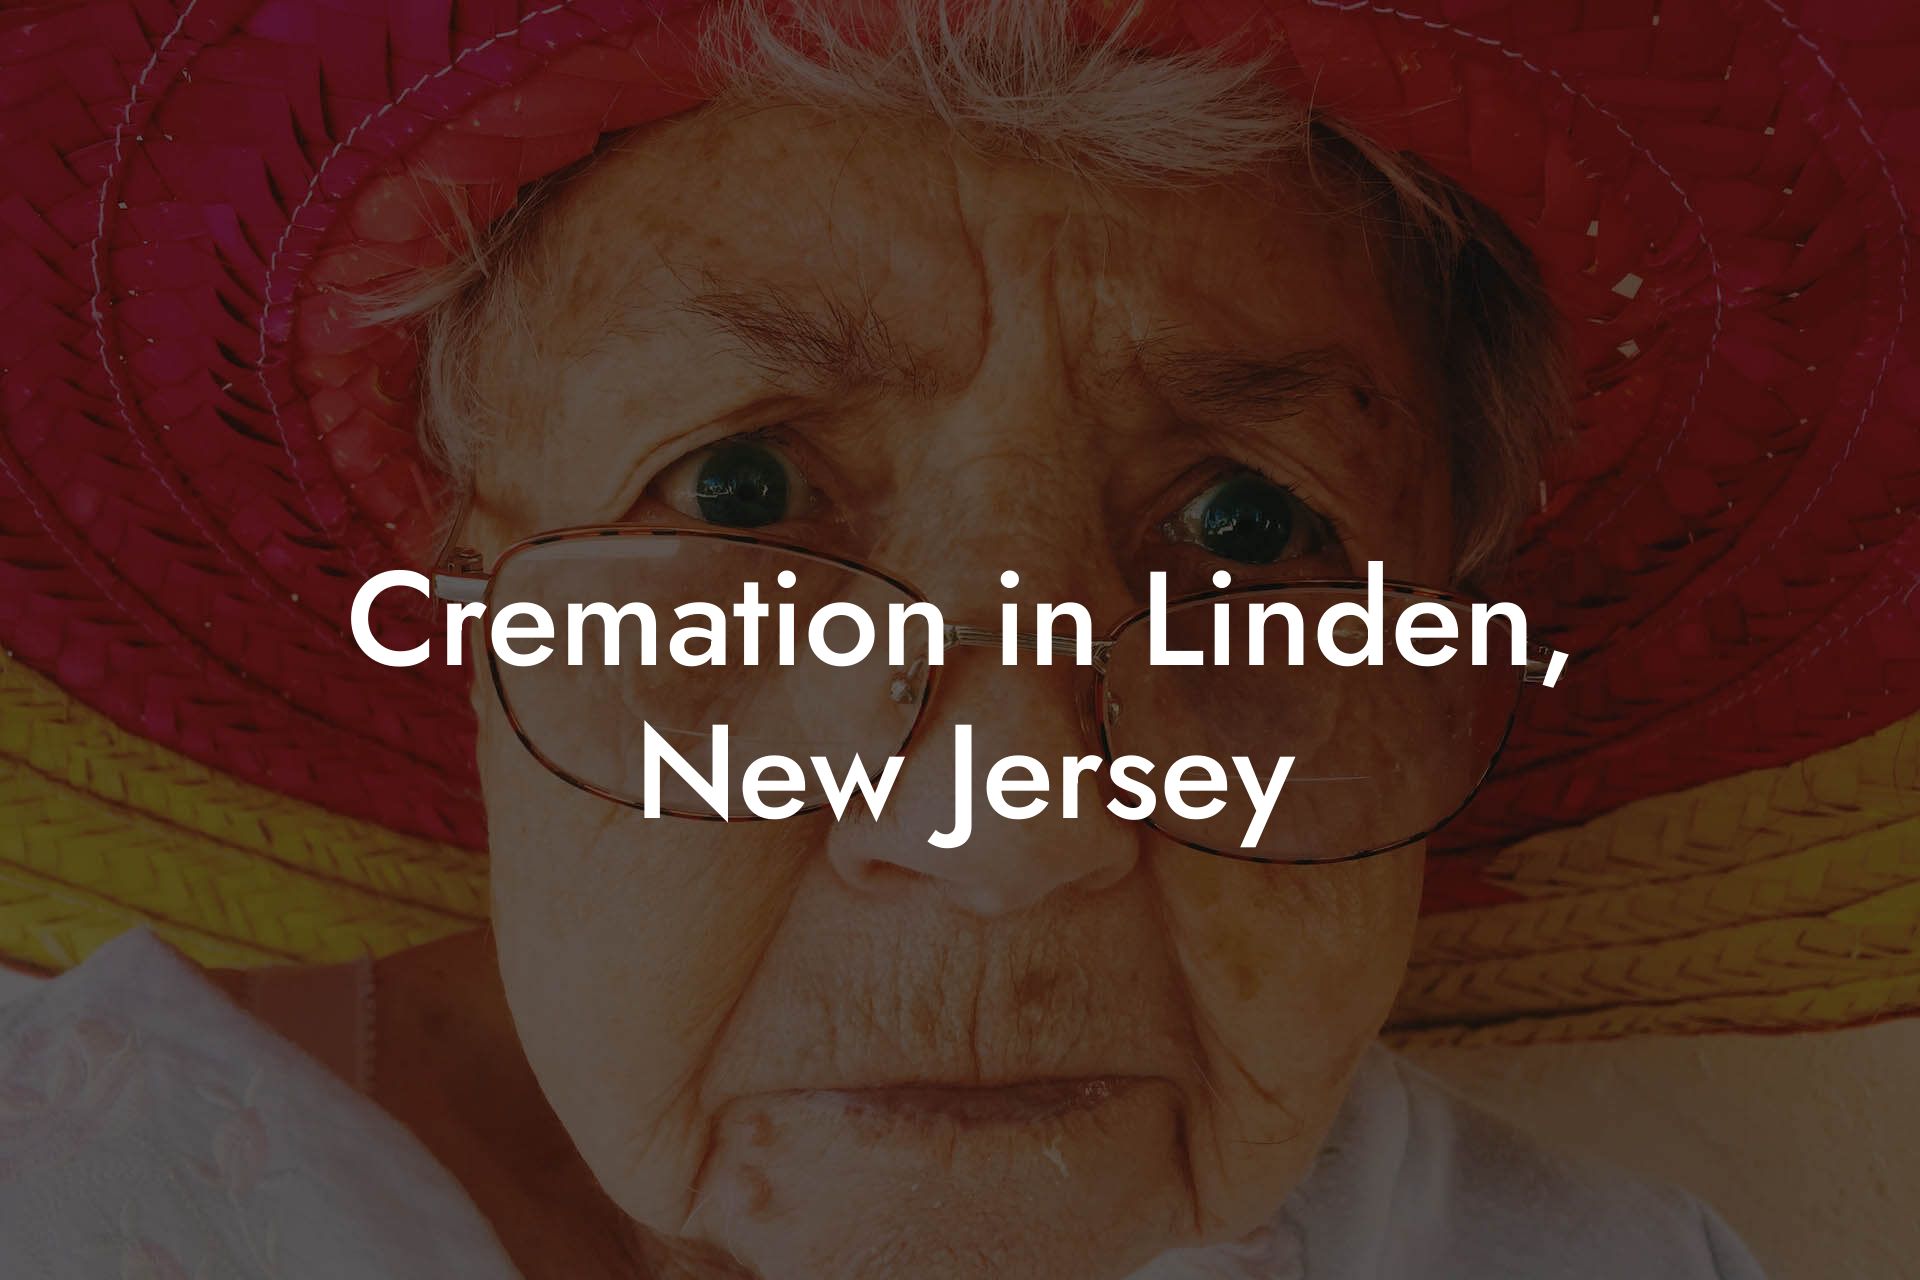 Cremation in Linden, New Jersey